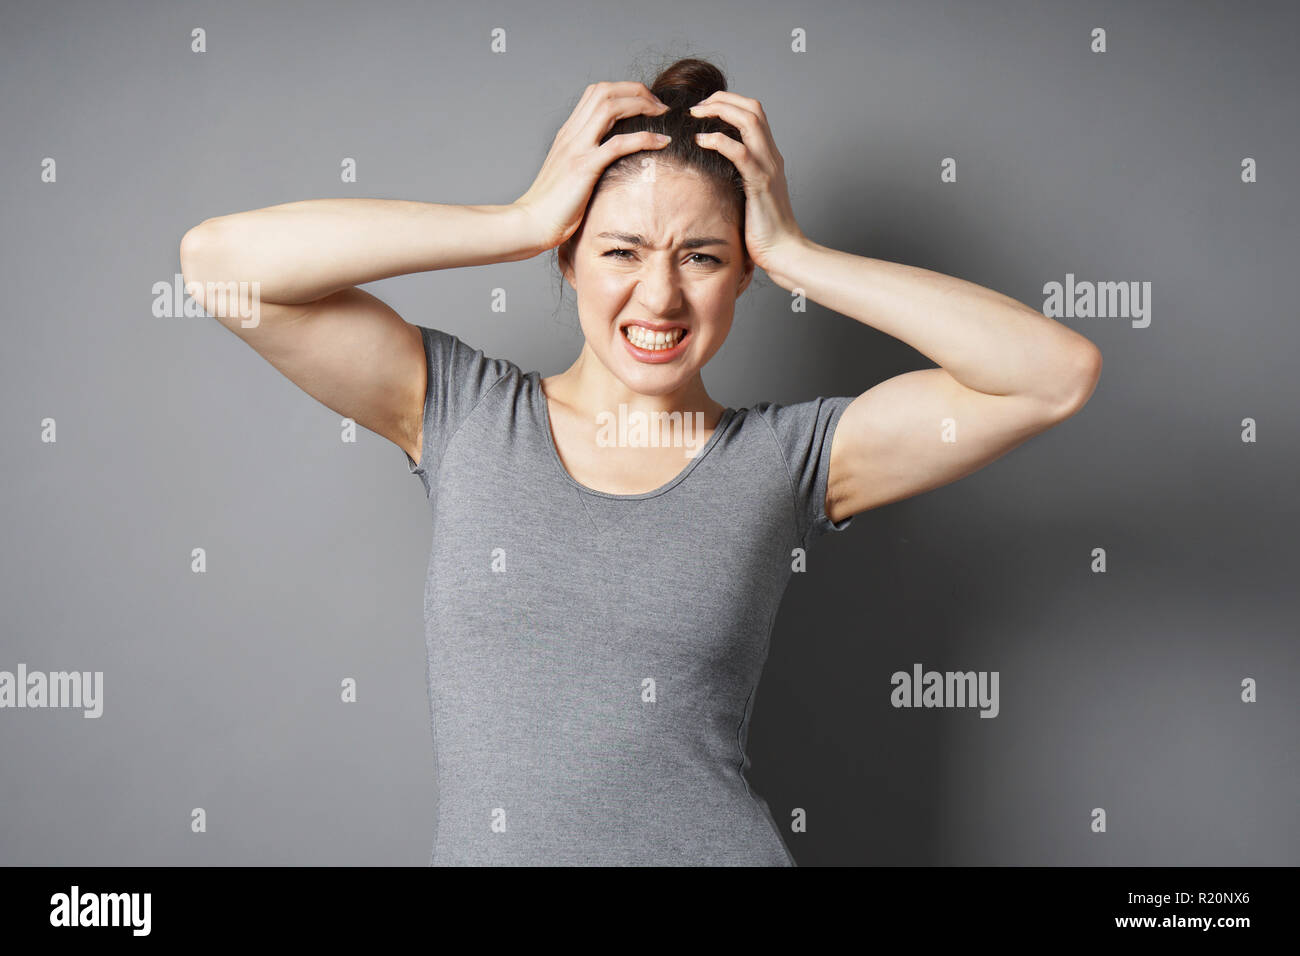 stressed young woman in despair or pain Stock Photo